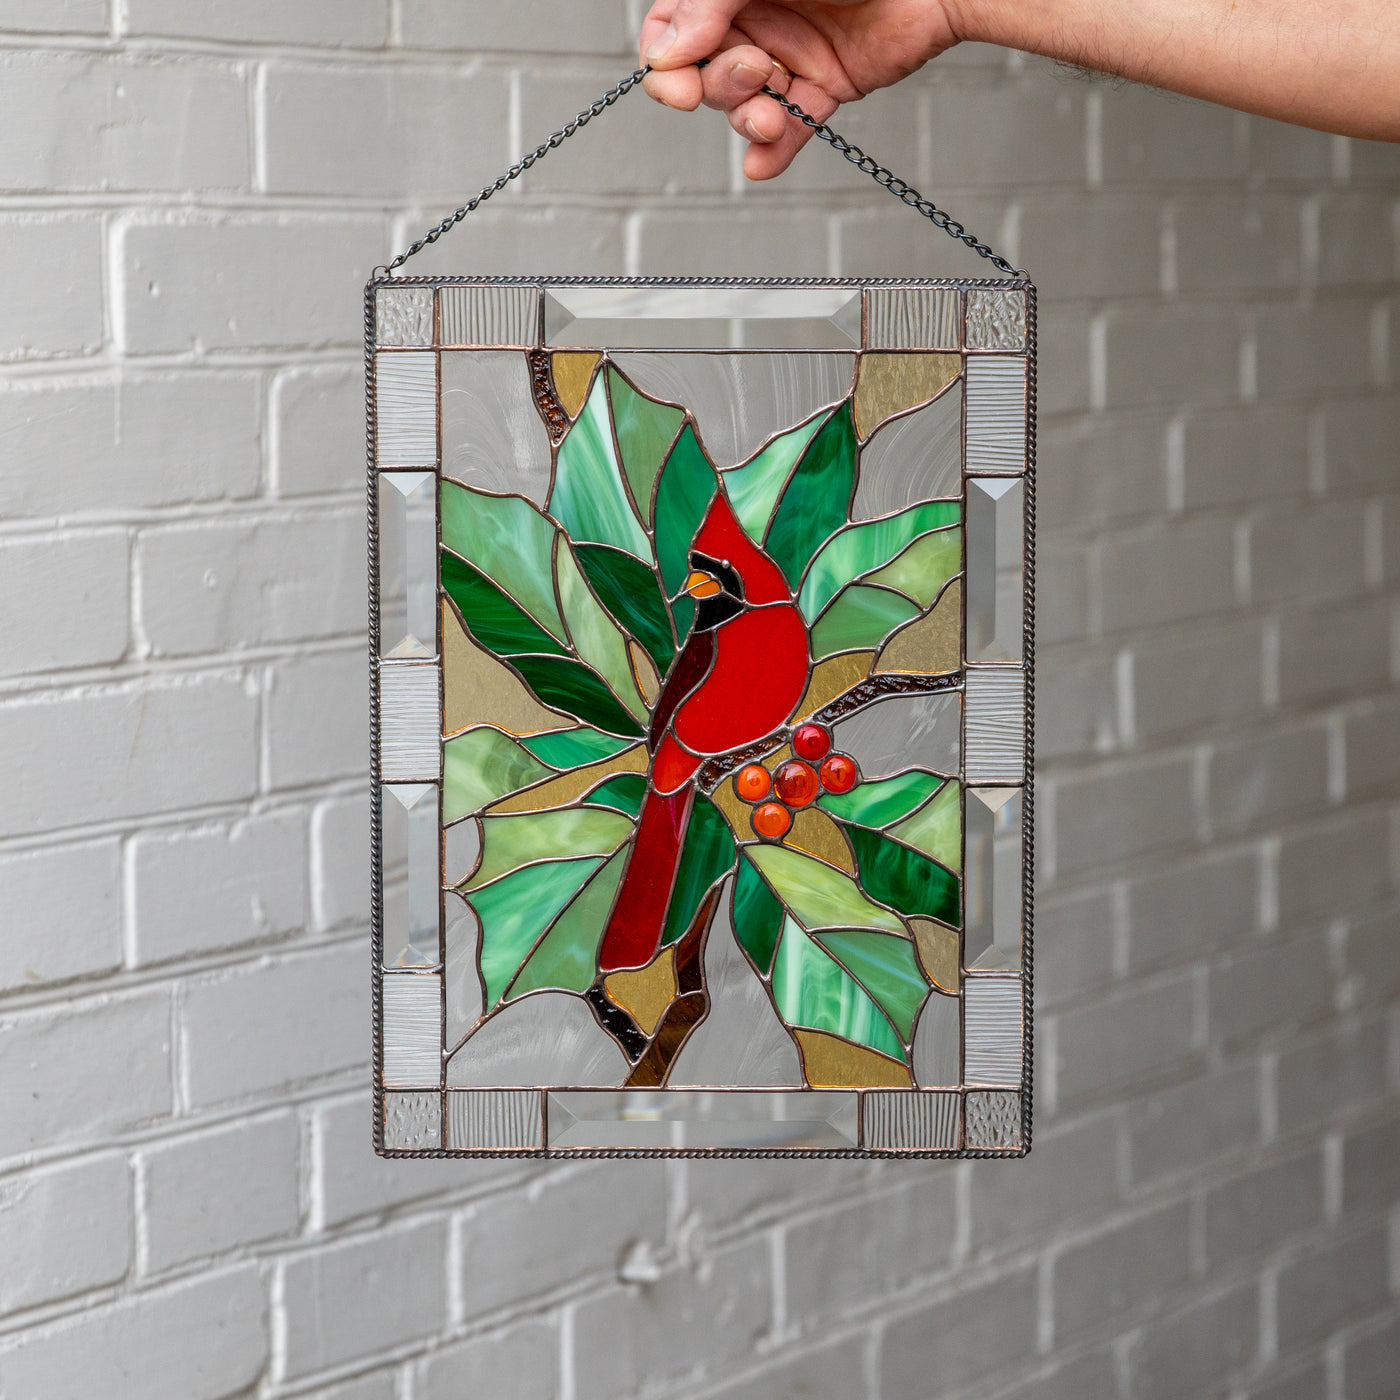 Elegant stained glass panel of a red winter bird sitting on the branch with leaves and berries